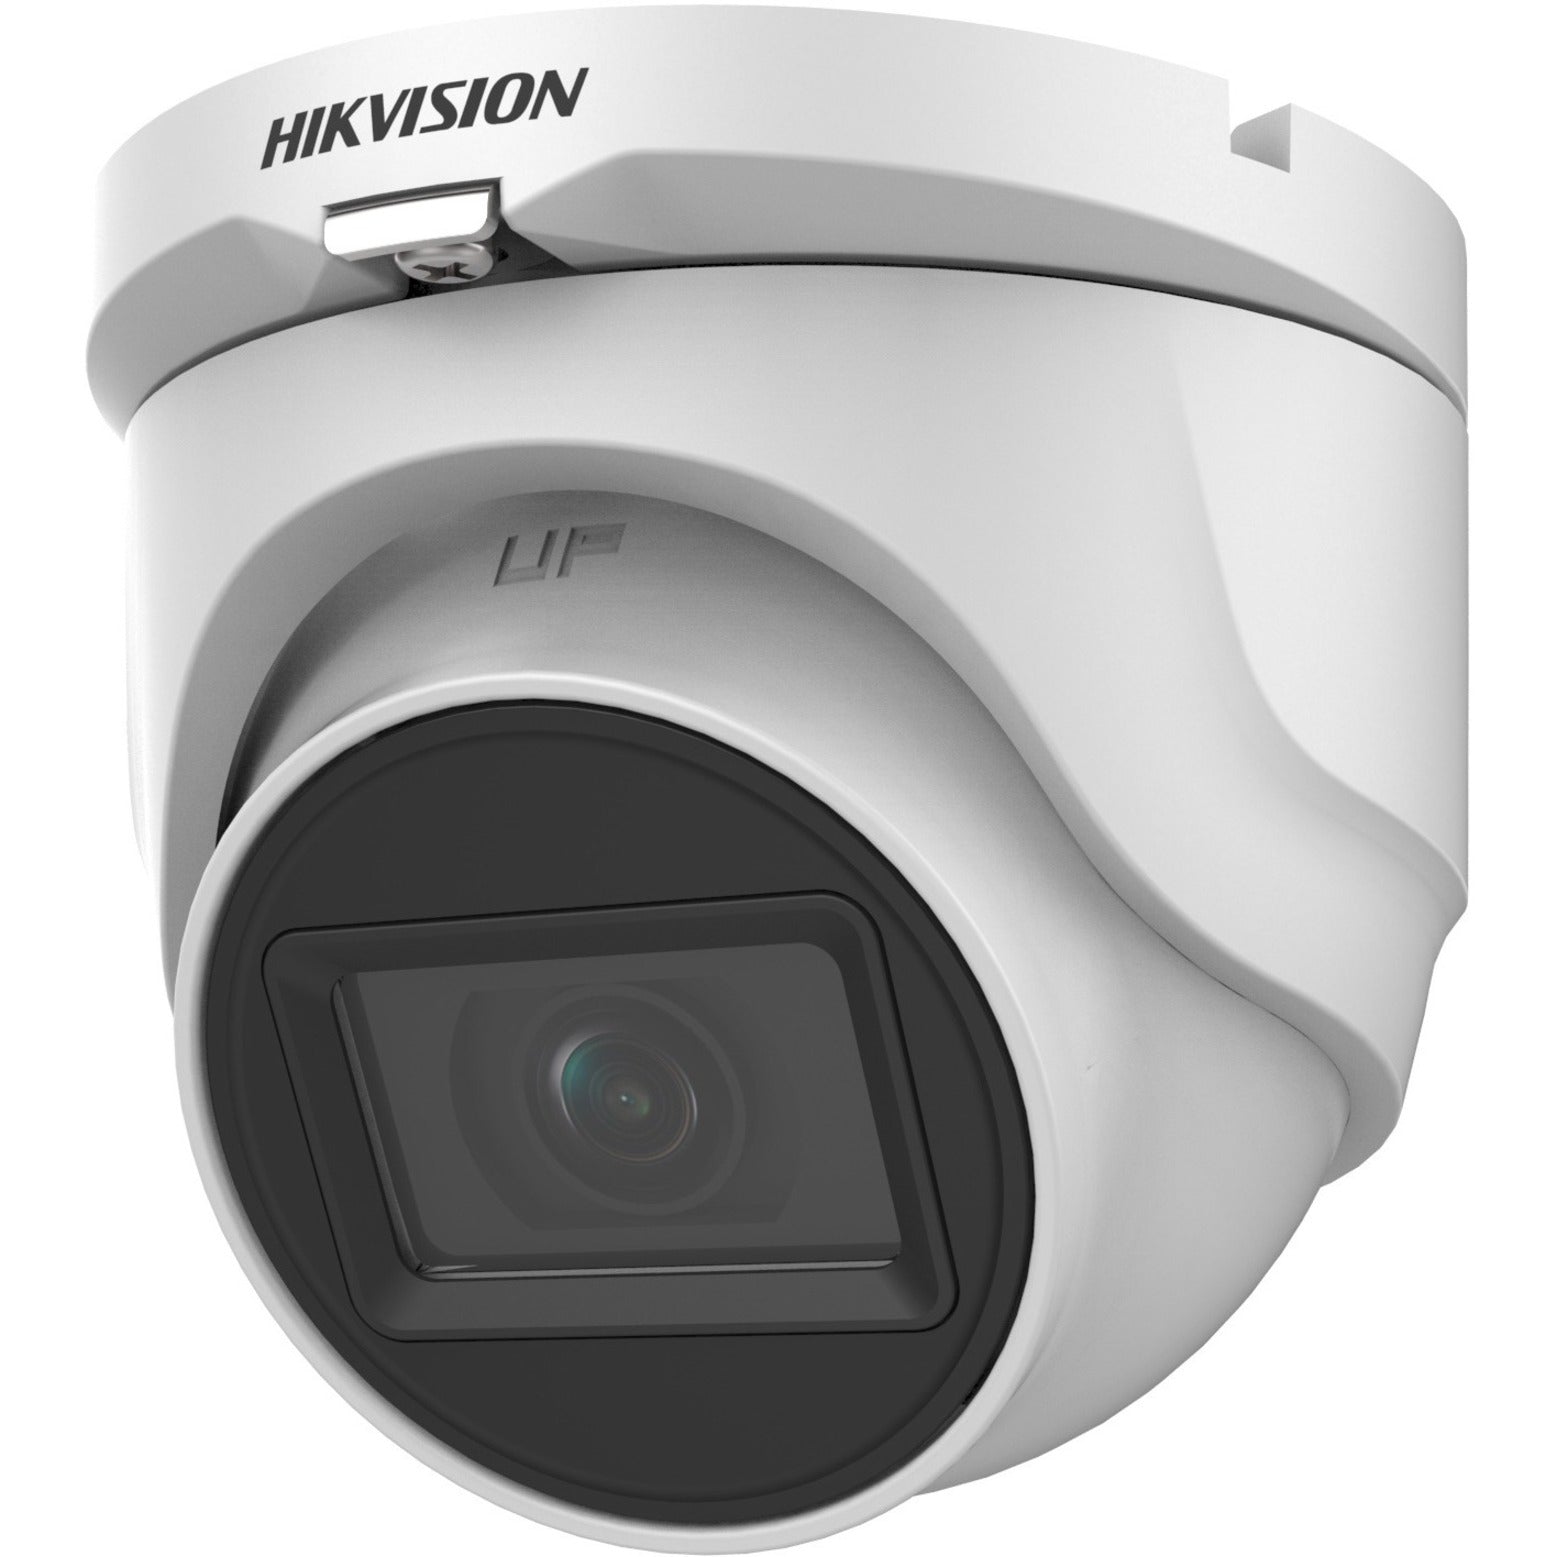 Hikvision DS2CE76H0TITMF3.6MM 5 MP Outdoor Turret Camera, 30m IR, 3.6mm Lens